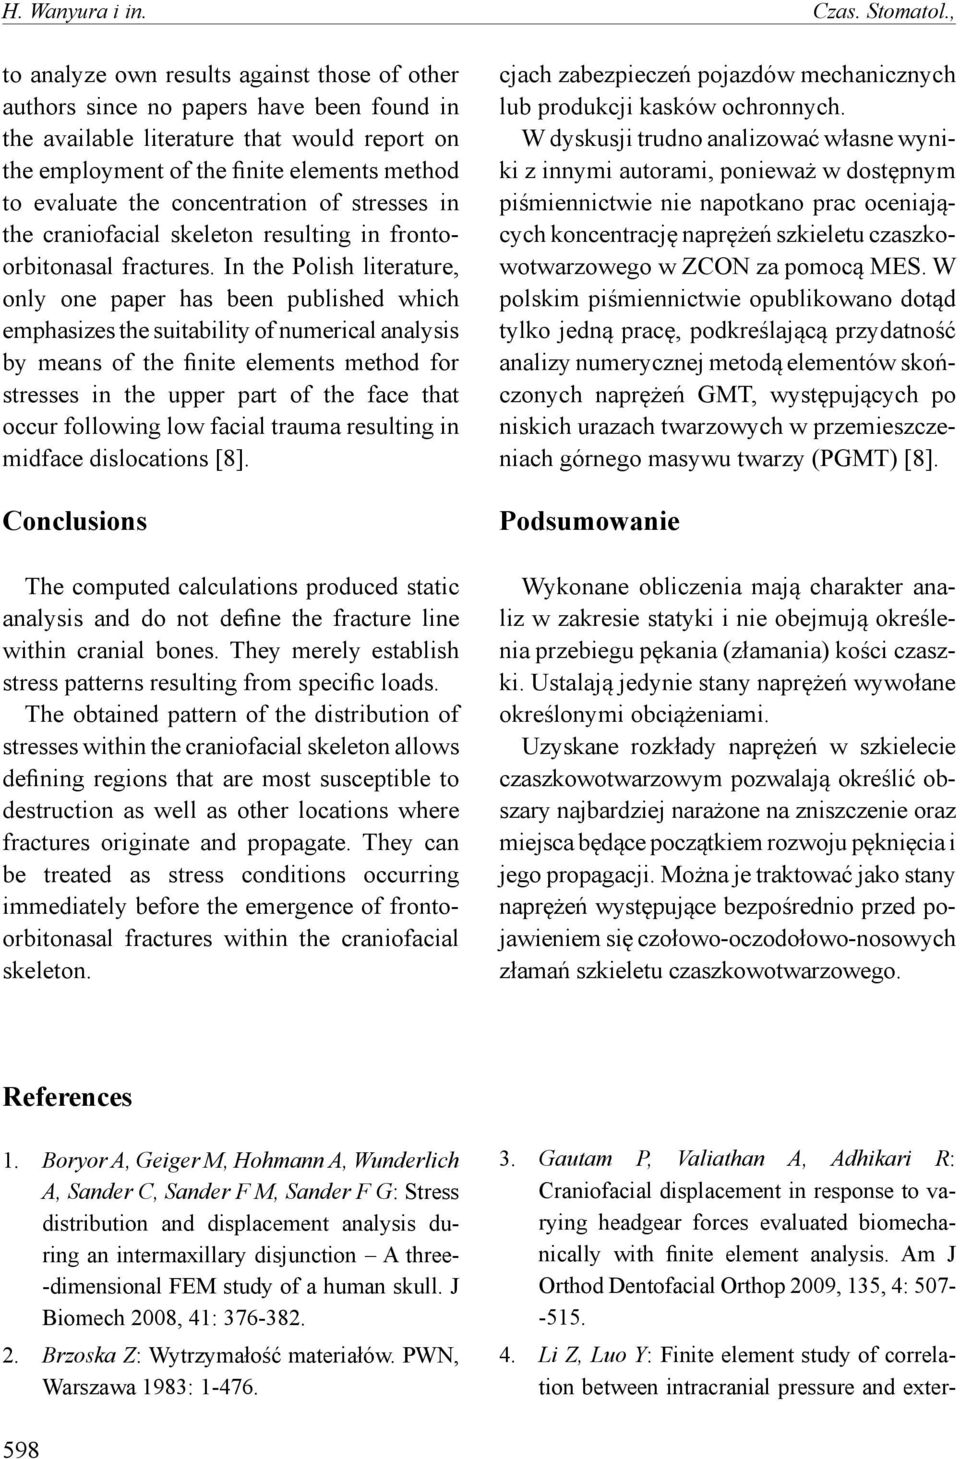 literature that would report on the employment of the finite elements method to evaluate the concentration of stresses in the craniofacial skeleton resulting in frontoorbitonasal fractures.